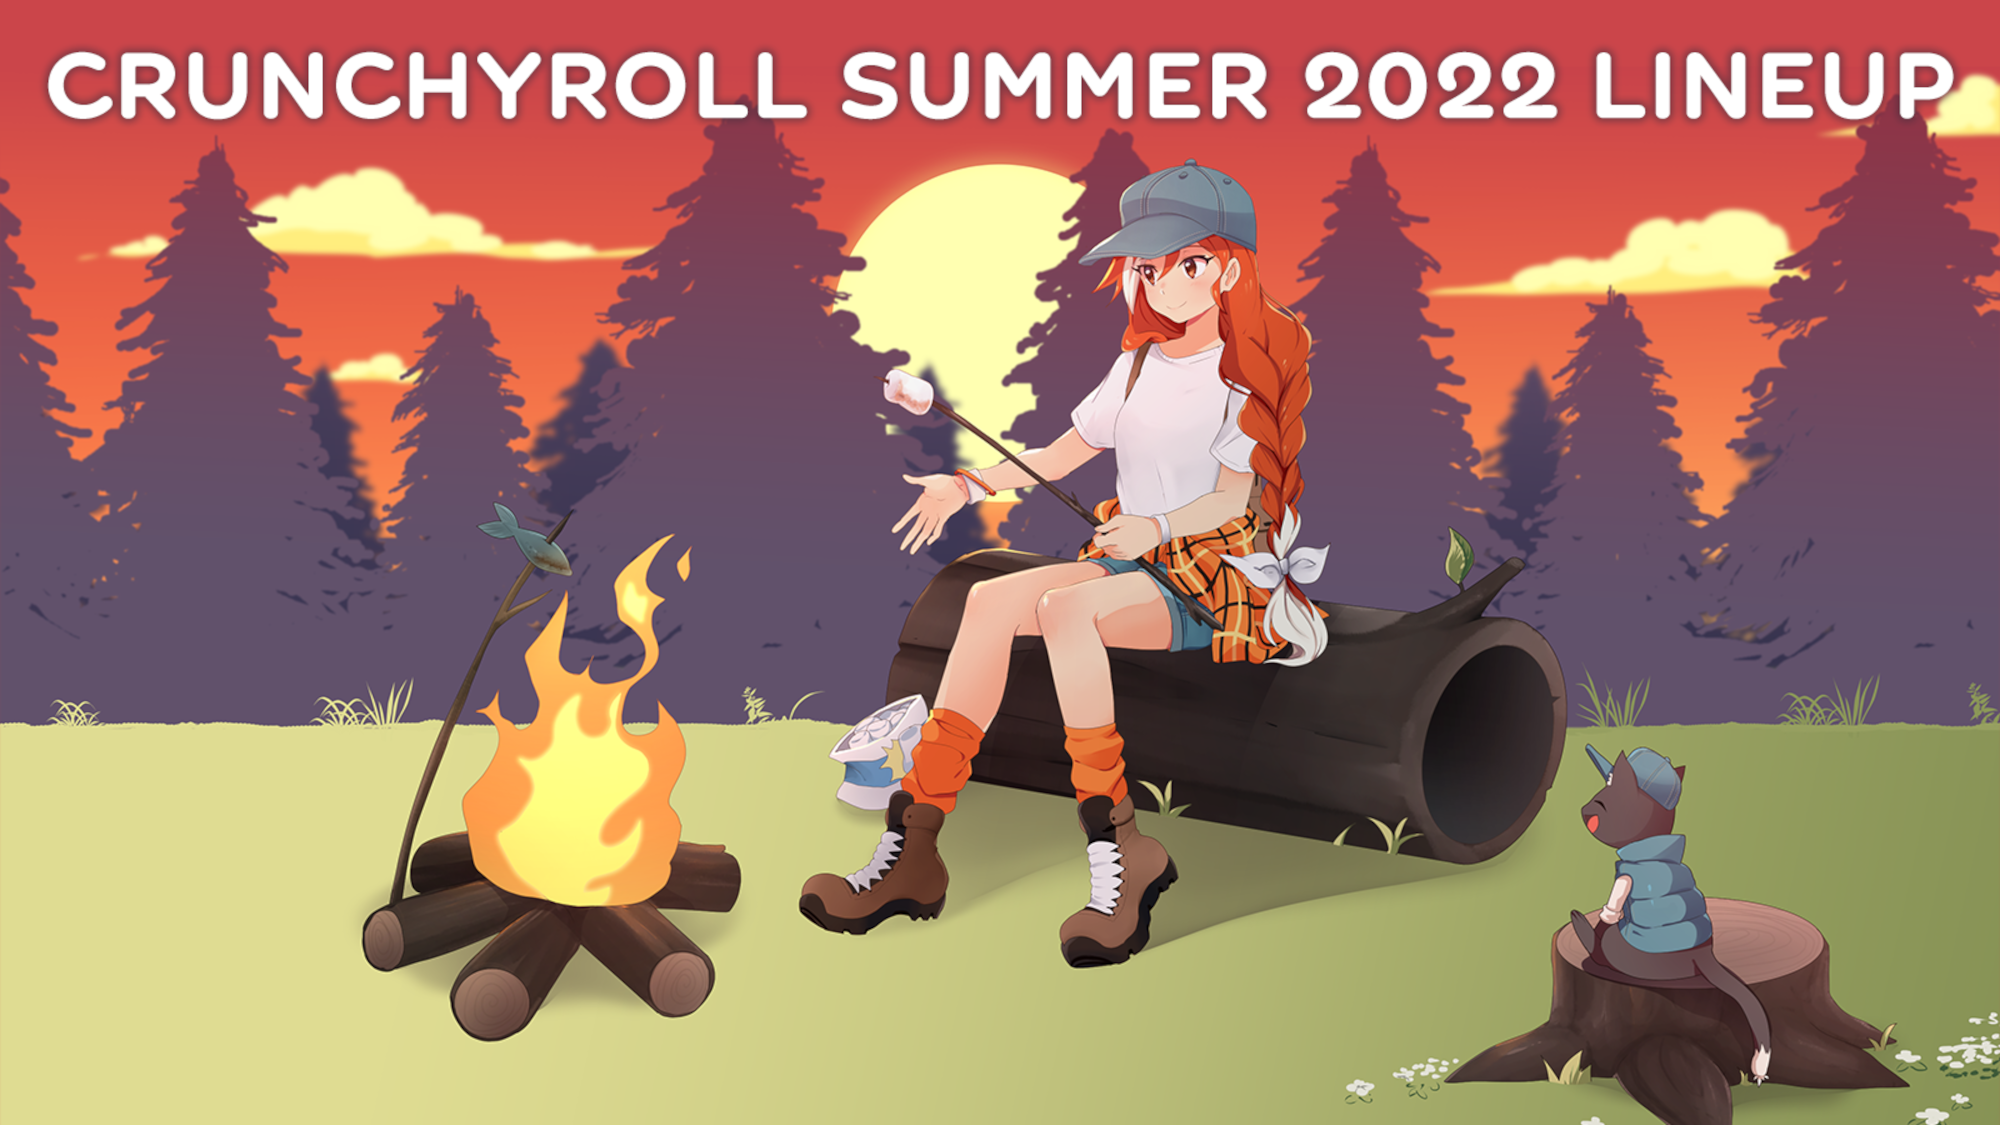 Key art for Crunchyroll's summer 2022 anime lineup. It features a girl with red, braided hair sitting on a log in front of a campfire.